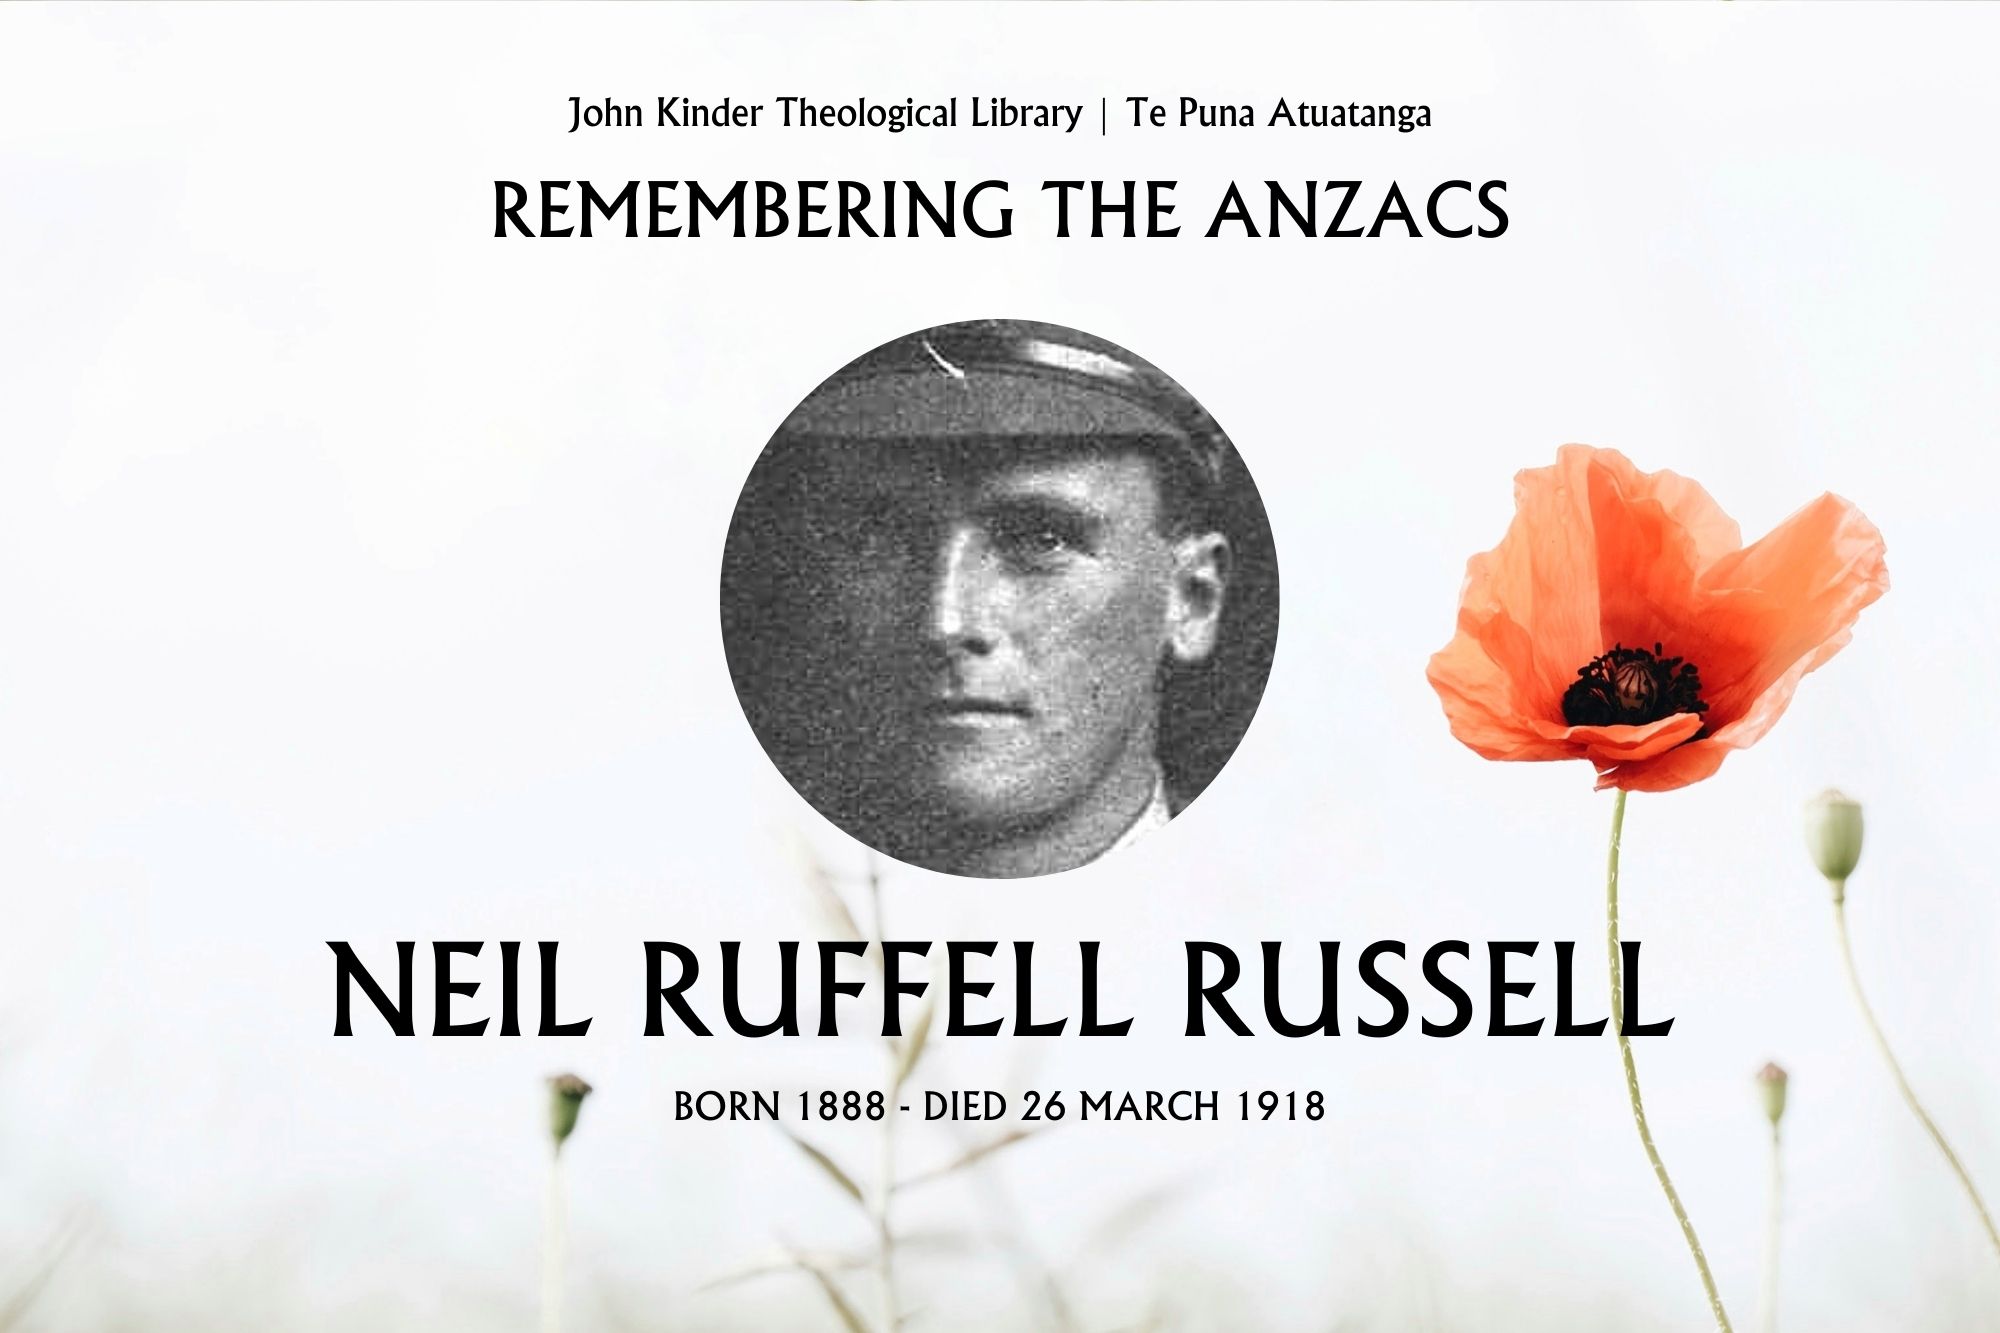 Remembering the ANZACs - John Kinder Theological Library - St John's College - Neil Ruffell Russell